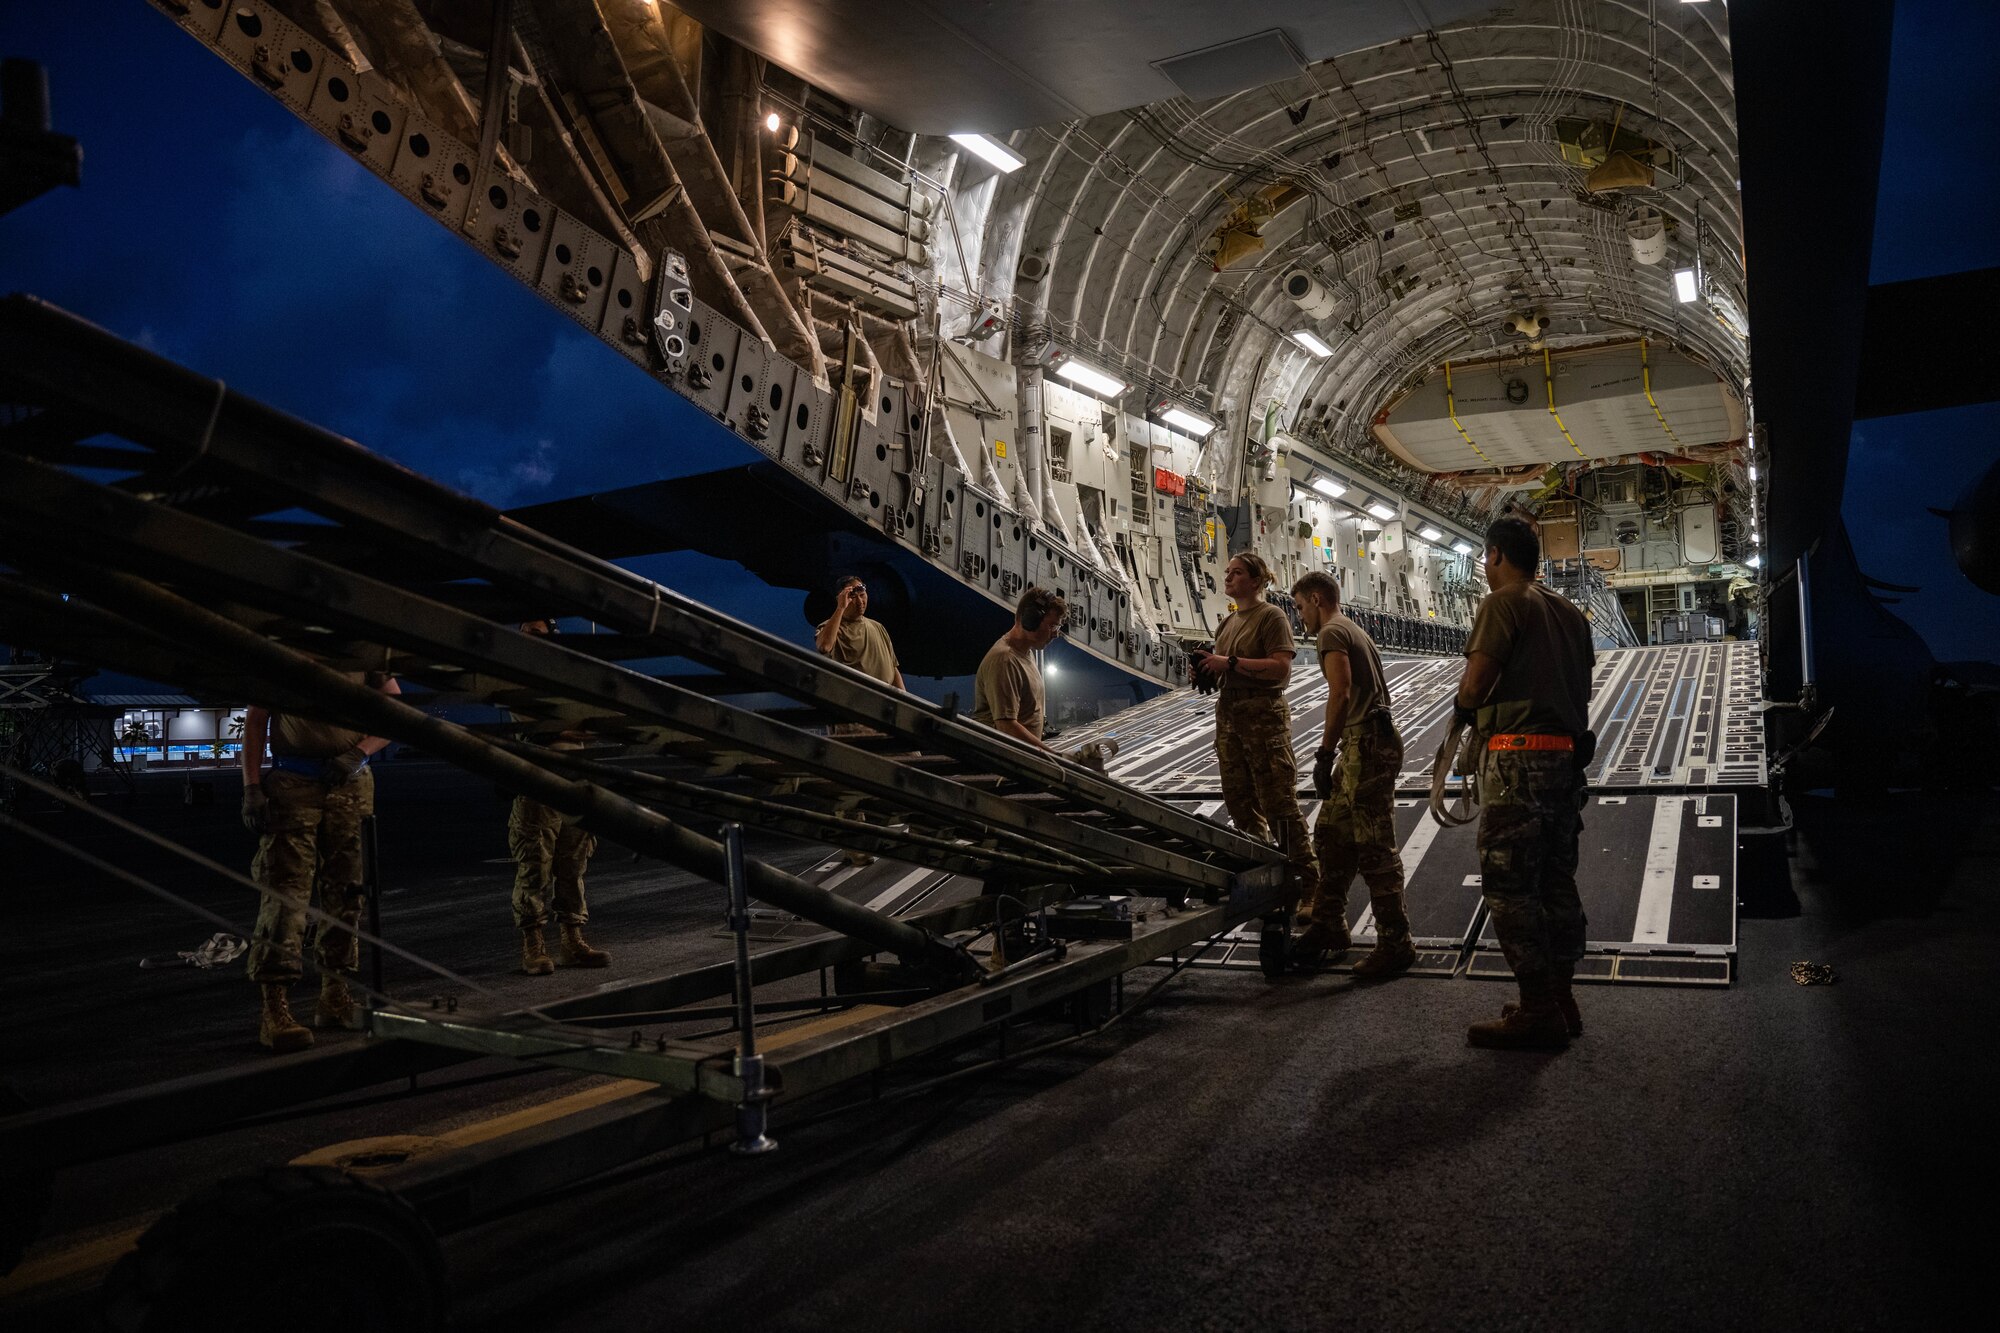 Airmen assigned to the 535th Airlift Squadron and the 735th Air Mobility Squadron load cargo on a C-17 Globemaster III at Joint Base Pearl Harbor-Hickam, Hawaii, during the Joint Base Readiness Exercise, March 1, 2023. JBRE provides realistic training in various operations, enabling our Airmen to provide distinct tools and capabilities needed for mission success in an ever-changing theater. (U.S. Air Force photo by Senior Airman Makensie Cooper)